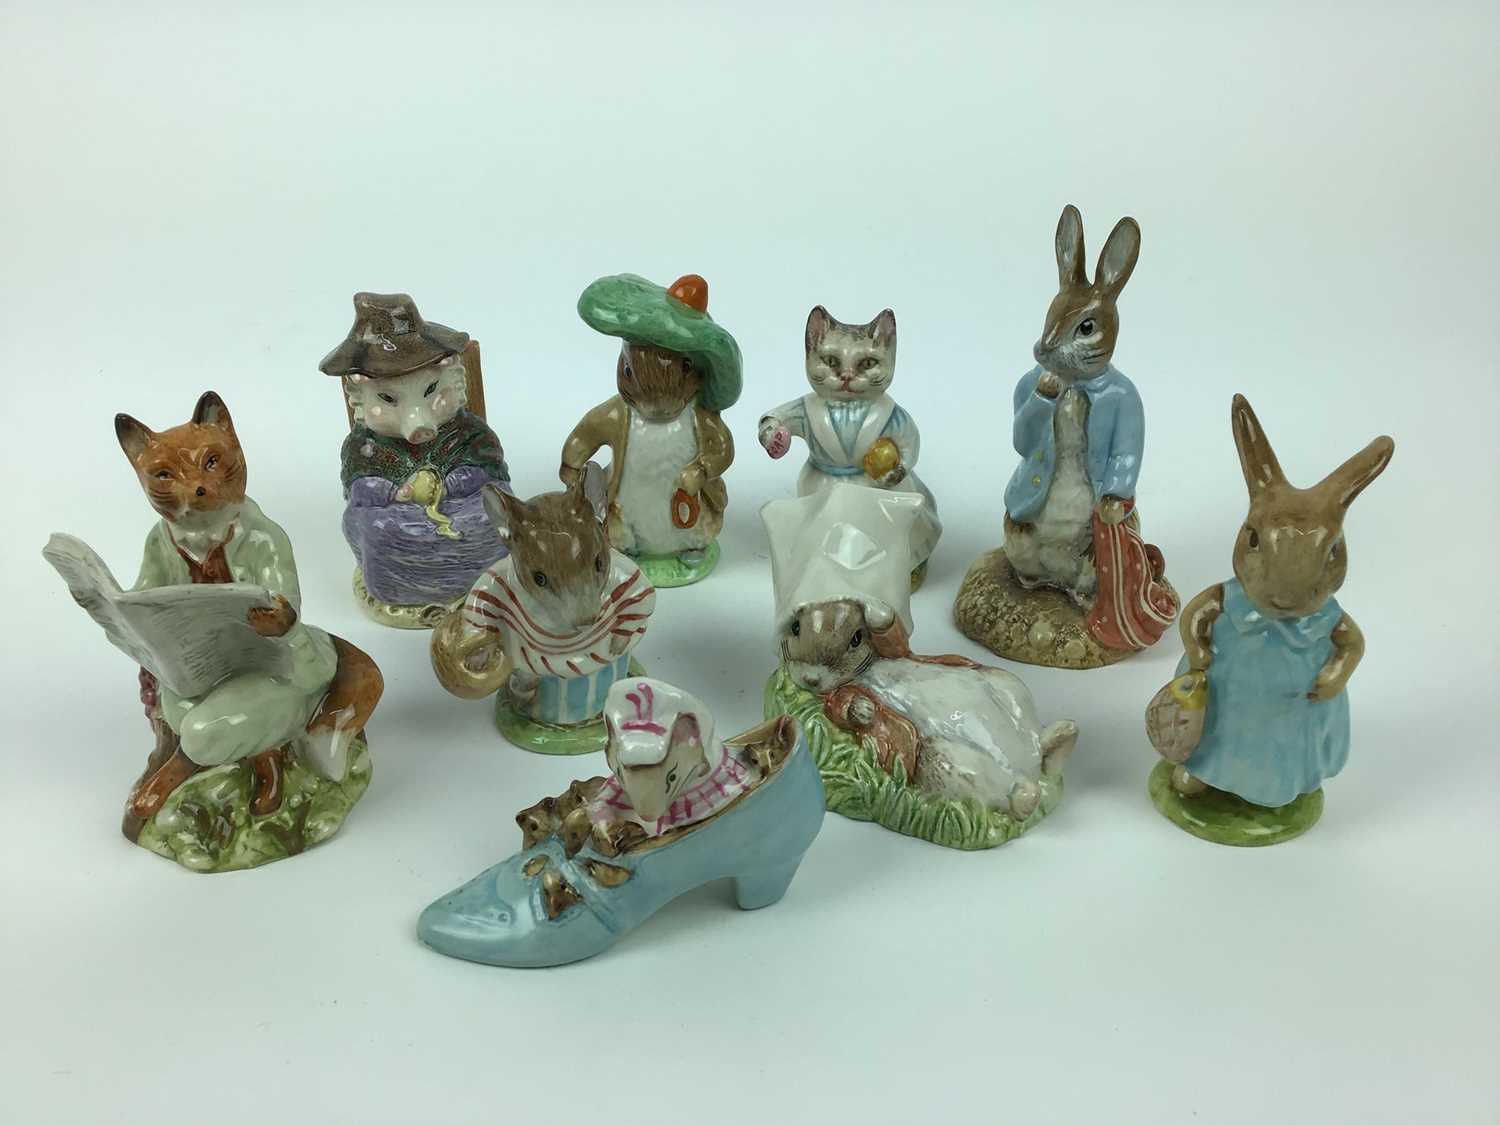 Lot 182 - Five Beswick Beatrix Potter figures - Benjamin Bunny, Tabitha Twitchett, The Old Woman who lived in a Shoe, Mrs Flopsy Bunny and Mts Tittlemouse plus four Royal Albert Beatrix Potter figures - Foxy...